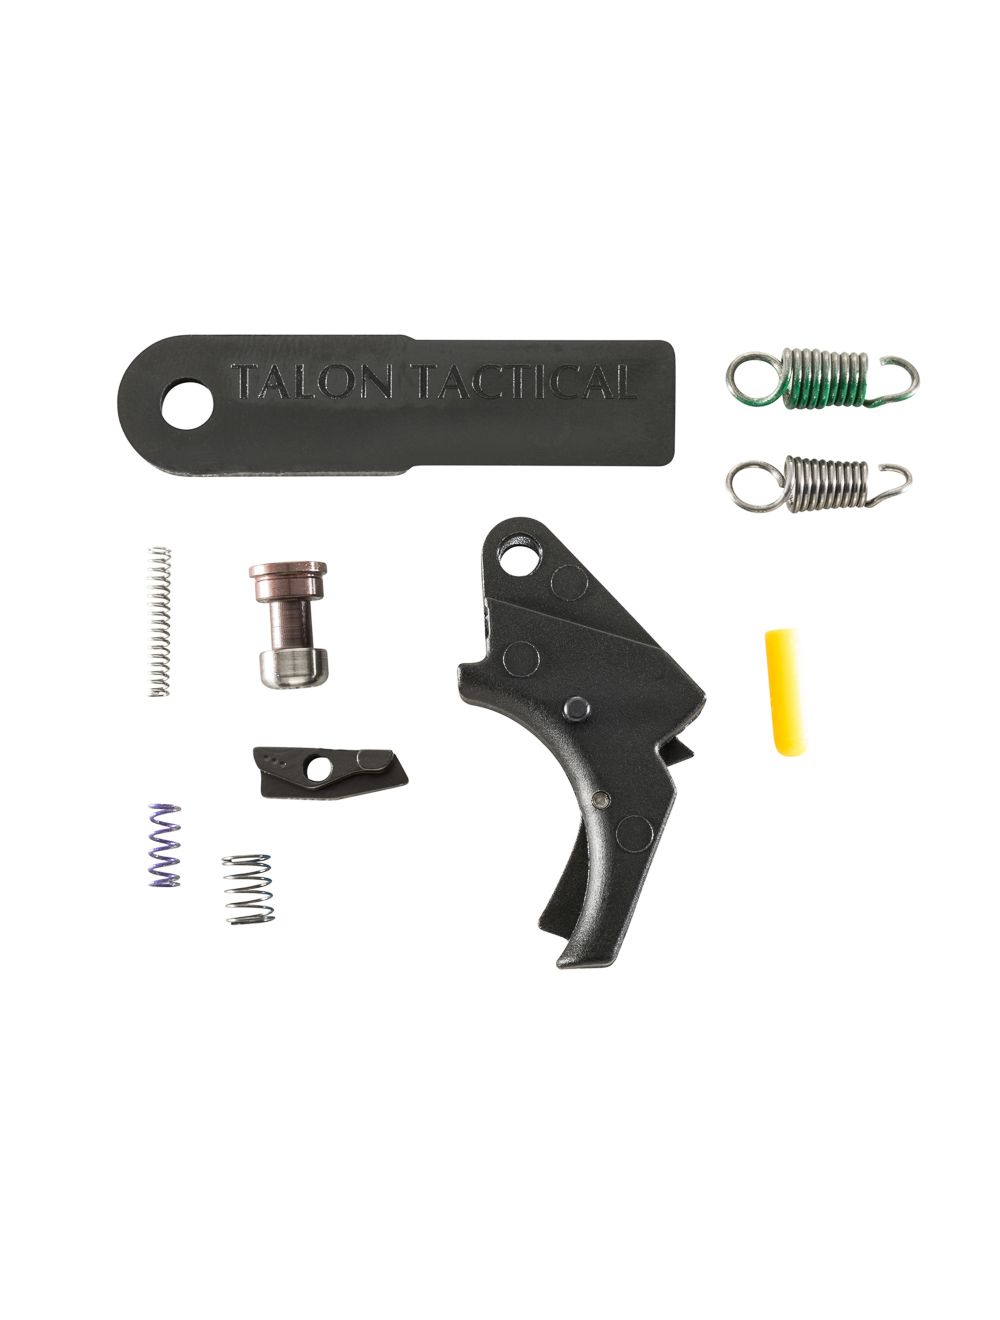 Curved Forward Set Sear & Trigger Kit for M&P